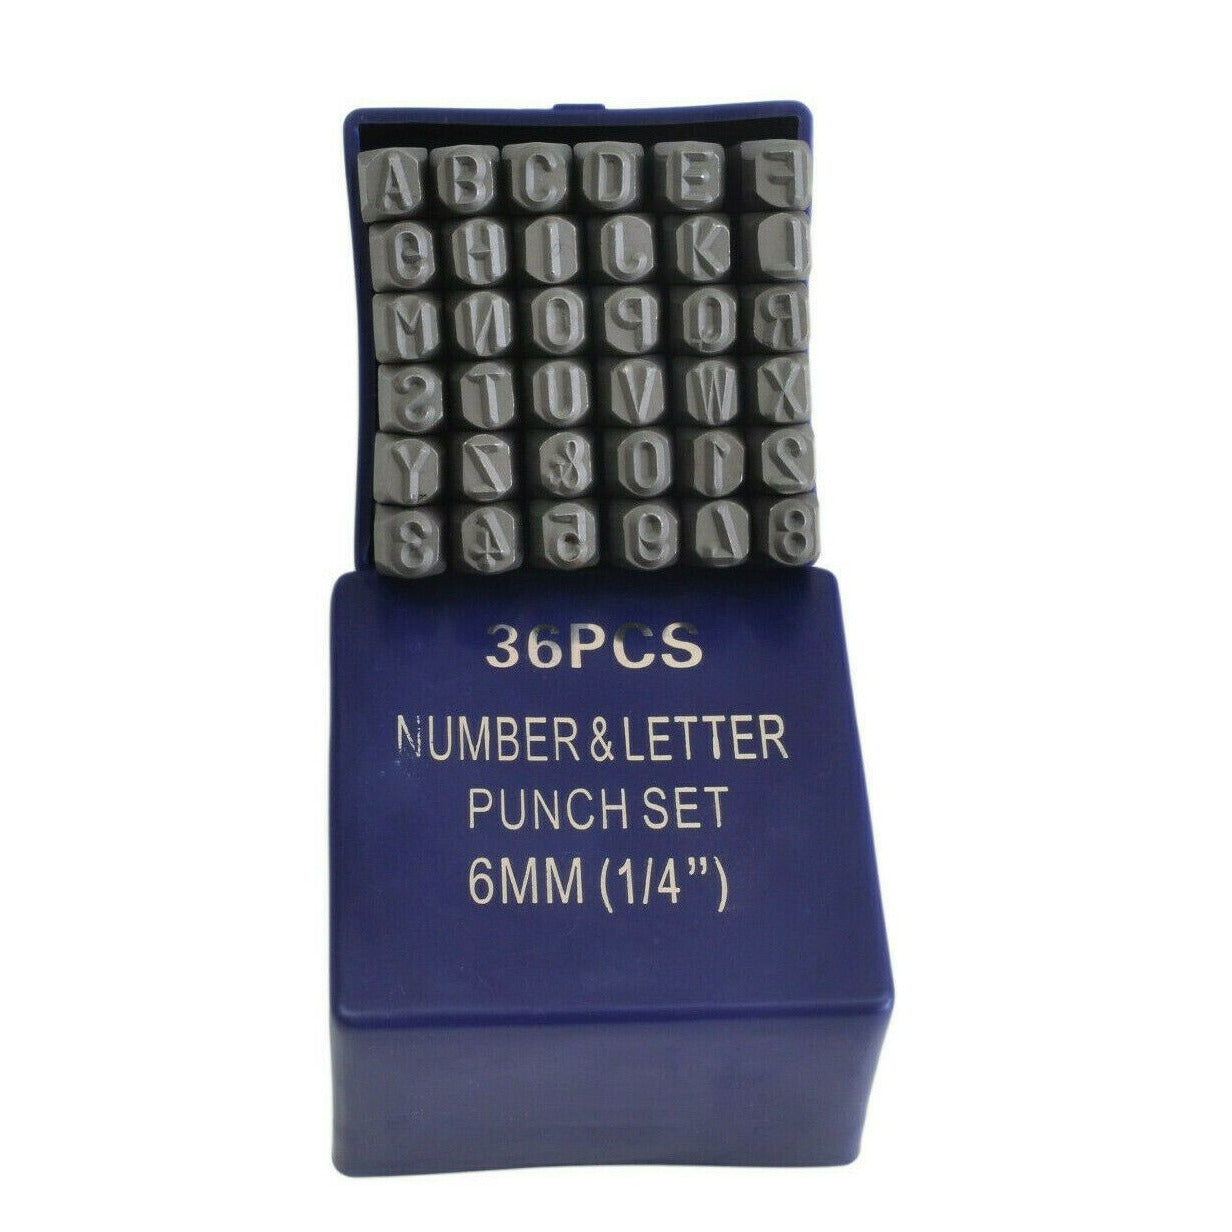 36pc x 6 mm or 1/4 Letter & number stamp punch Kit (A-Z & 0-9) Hardened steel